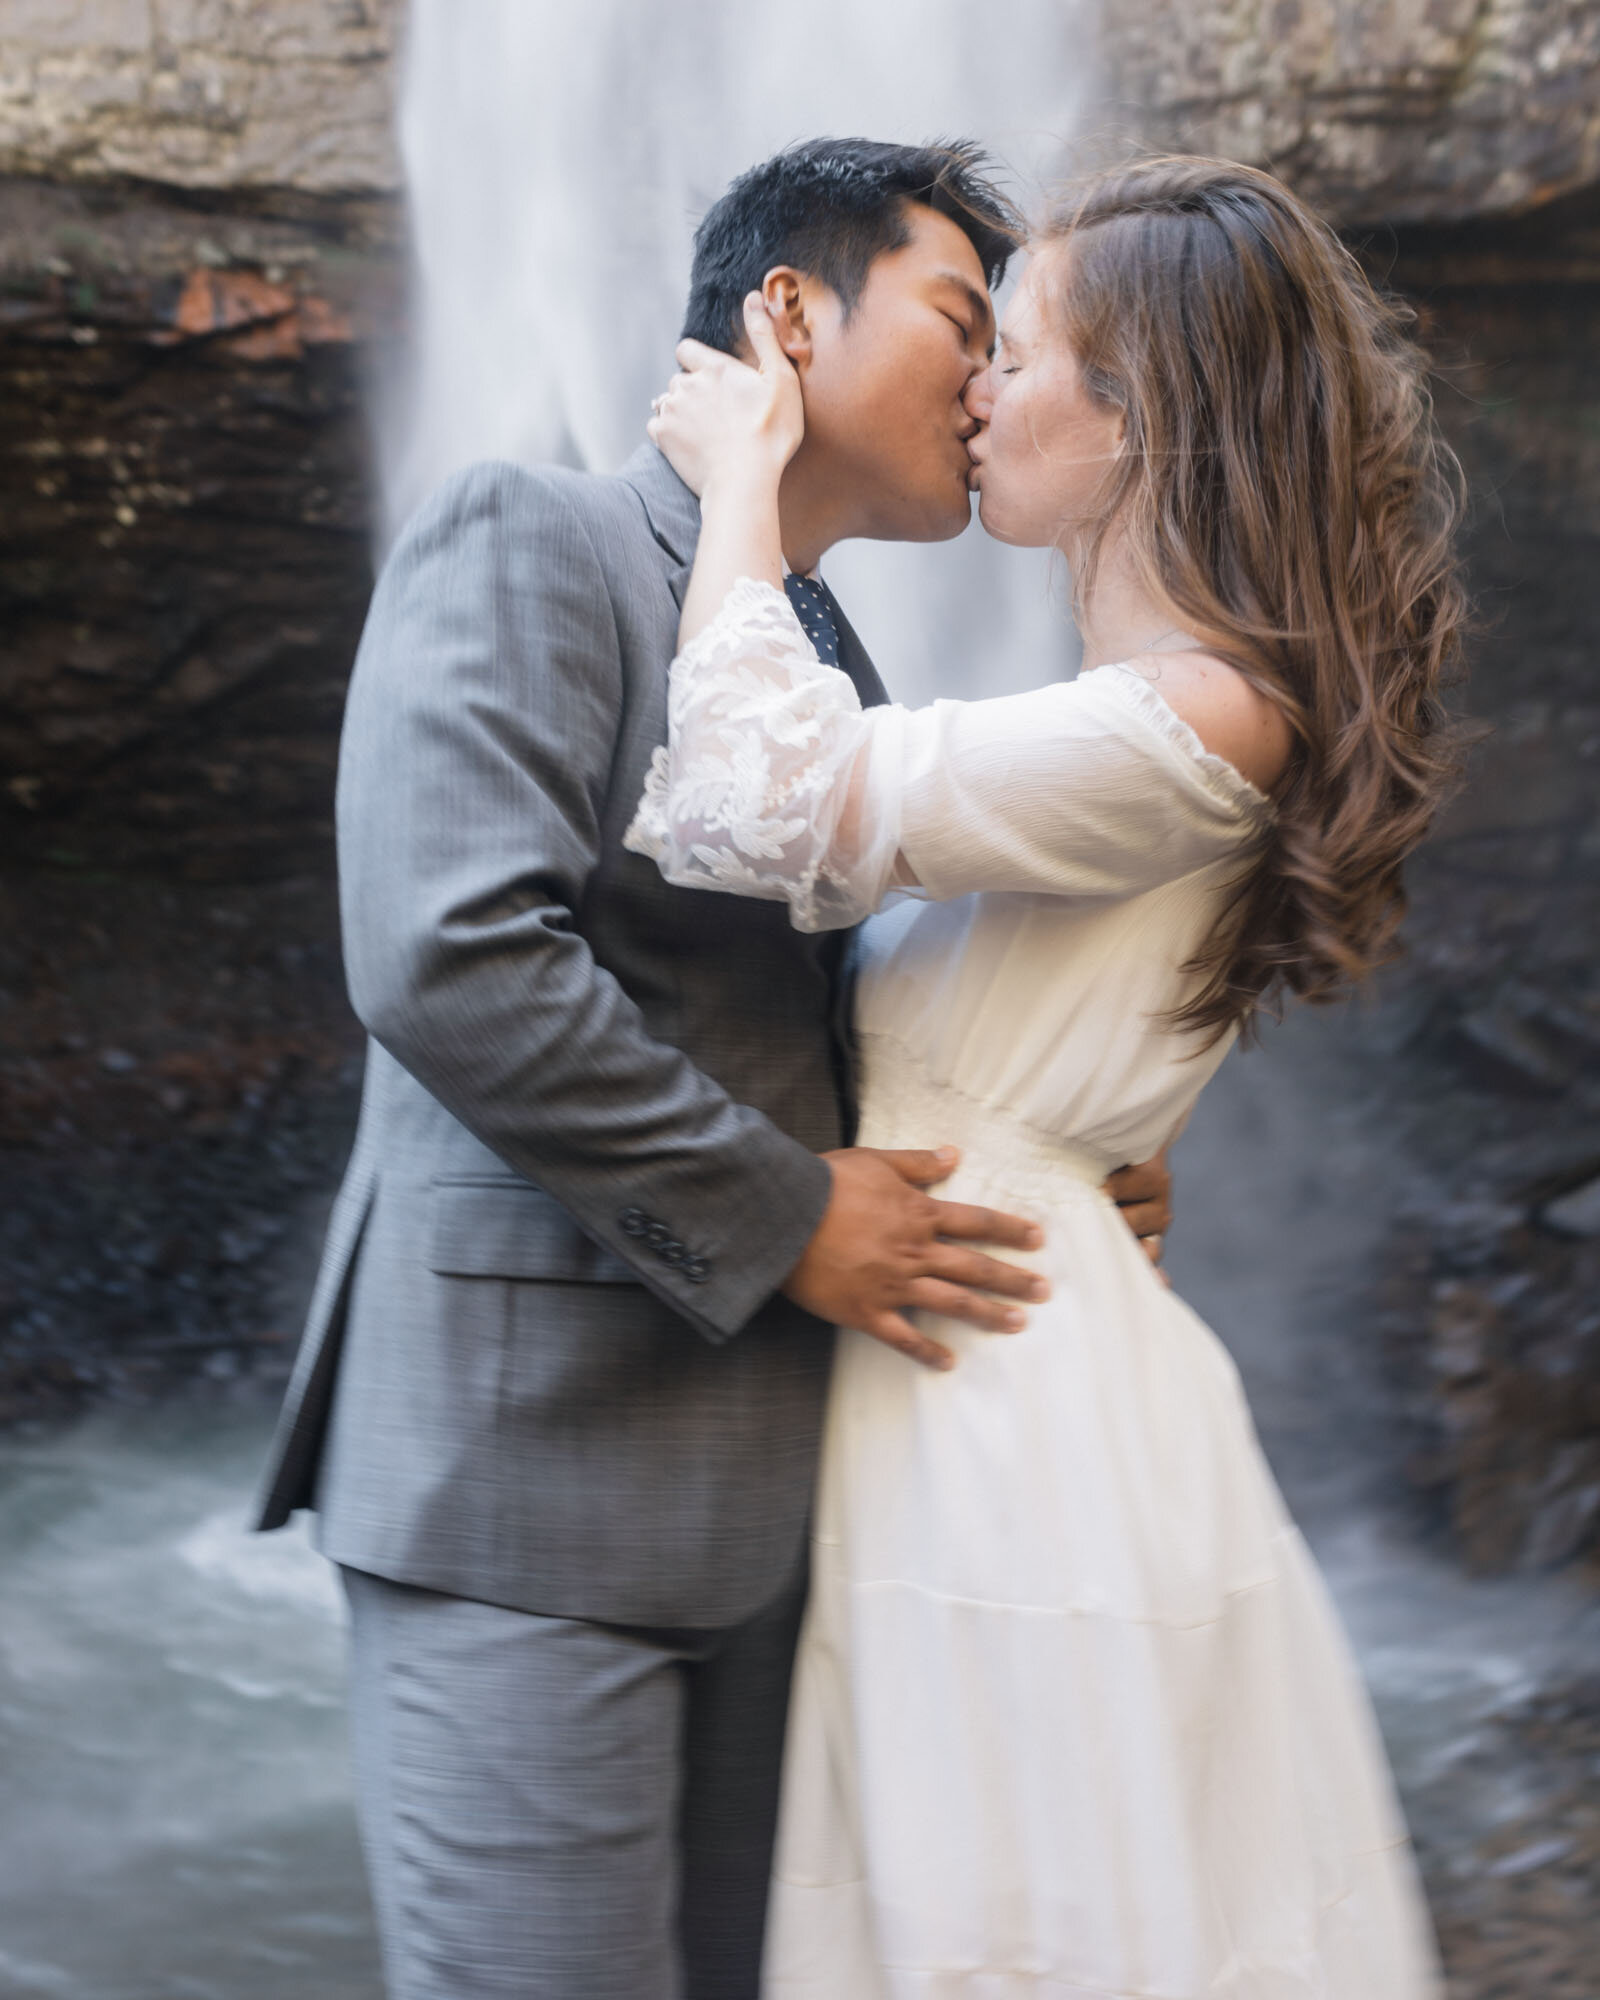 jessica-kovach-photography-finding-the-perfect-waterfall-for-your-elopement-eloping-in-fall-creek-falls-state-park-tn-168.jpg